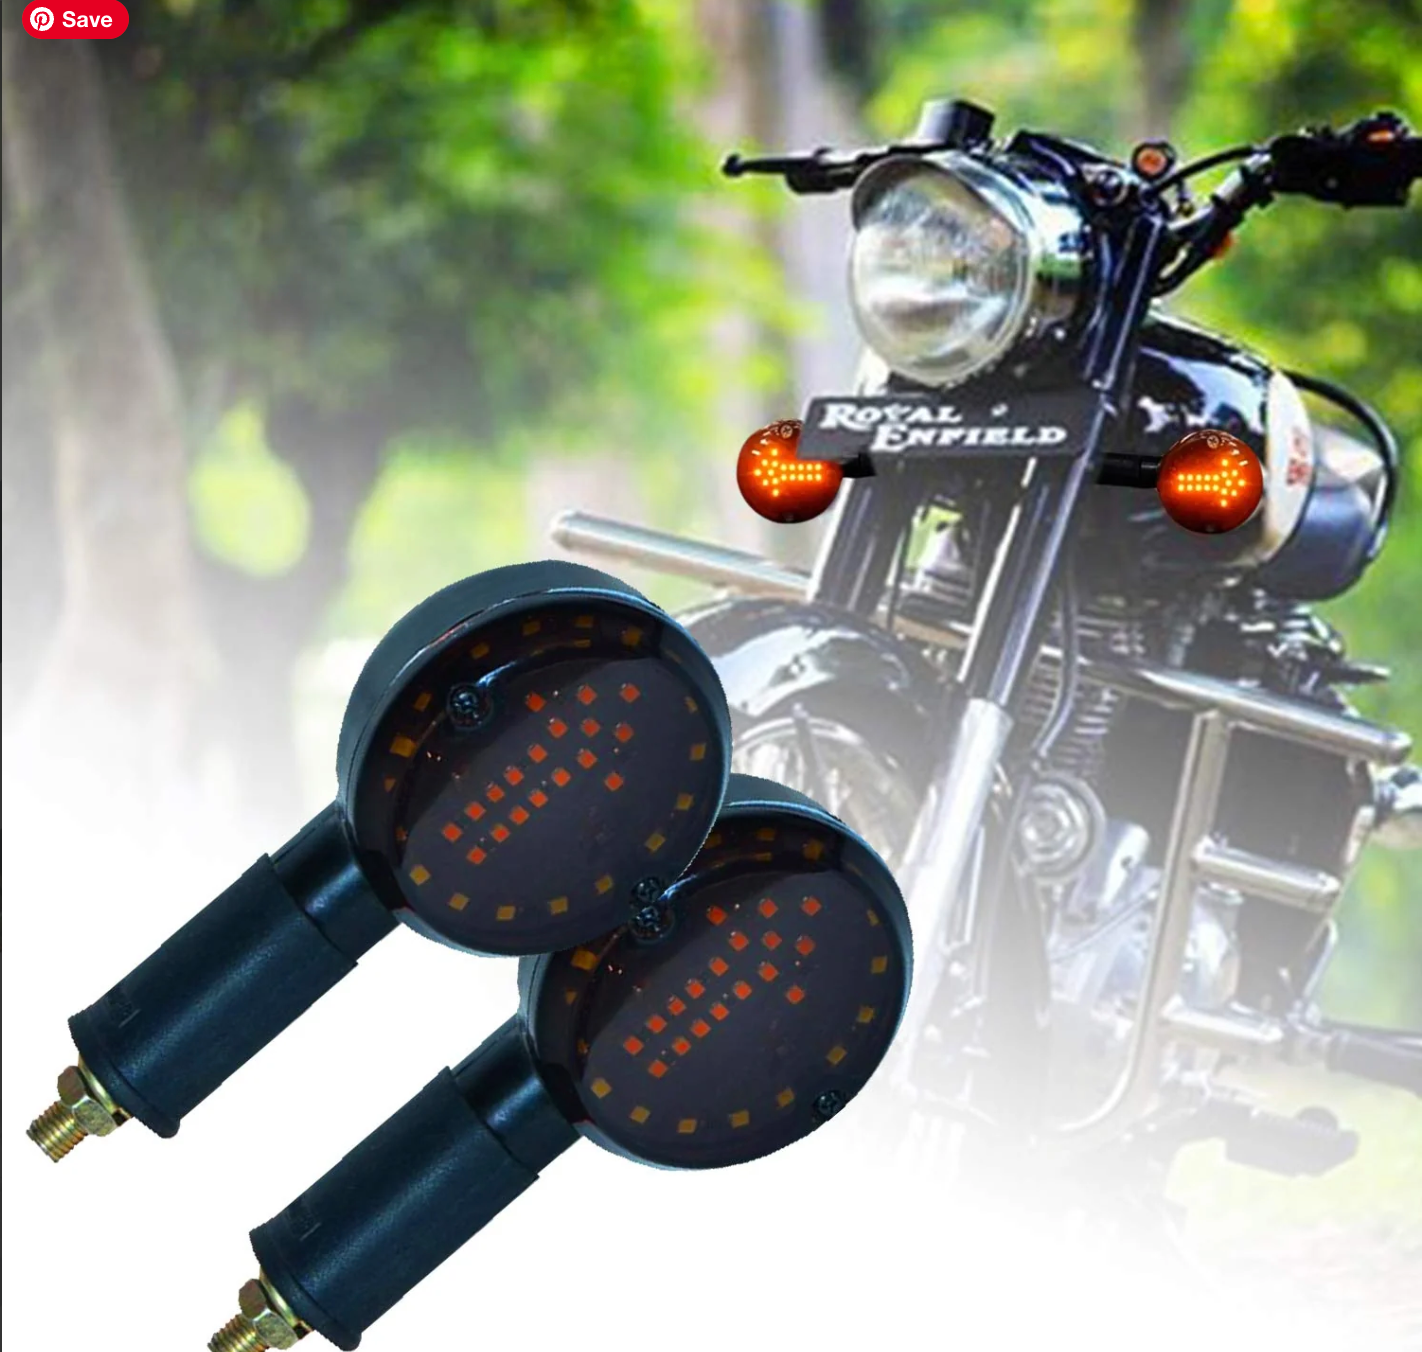 ARROW INDICATOR WITH RED TAIL LIGHT FOR ROYAL ENFIELD /CLASSIC / ELECTRA / STANDARD ,ETC